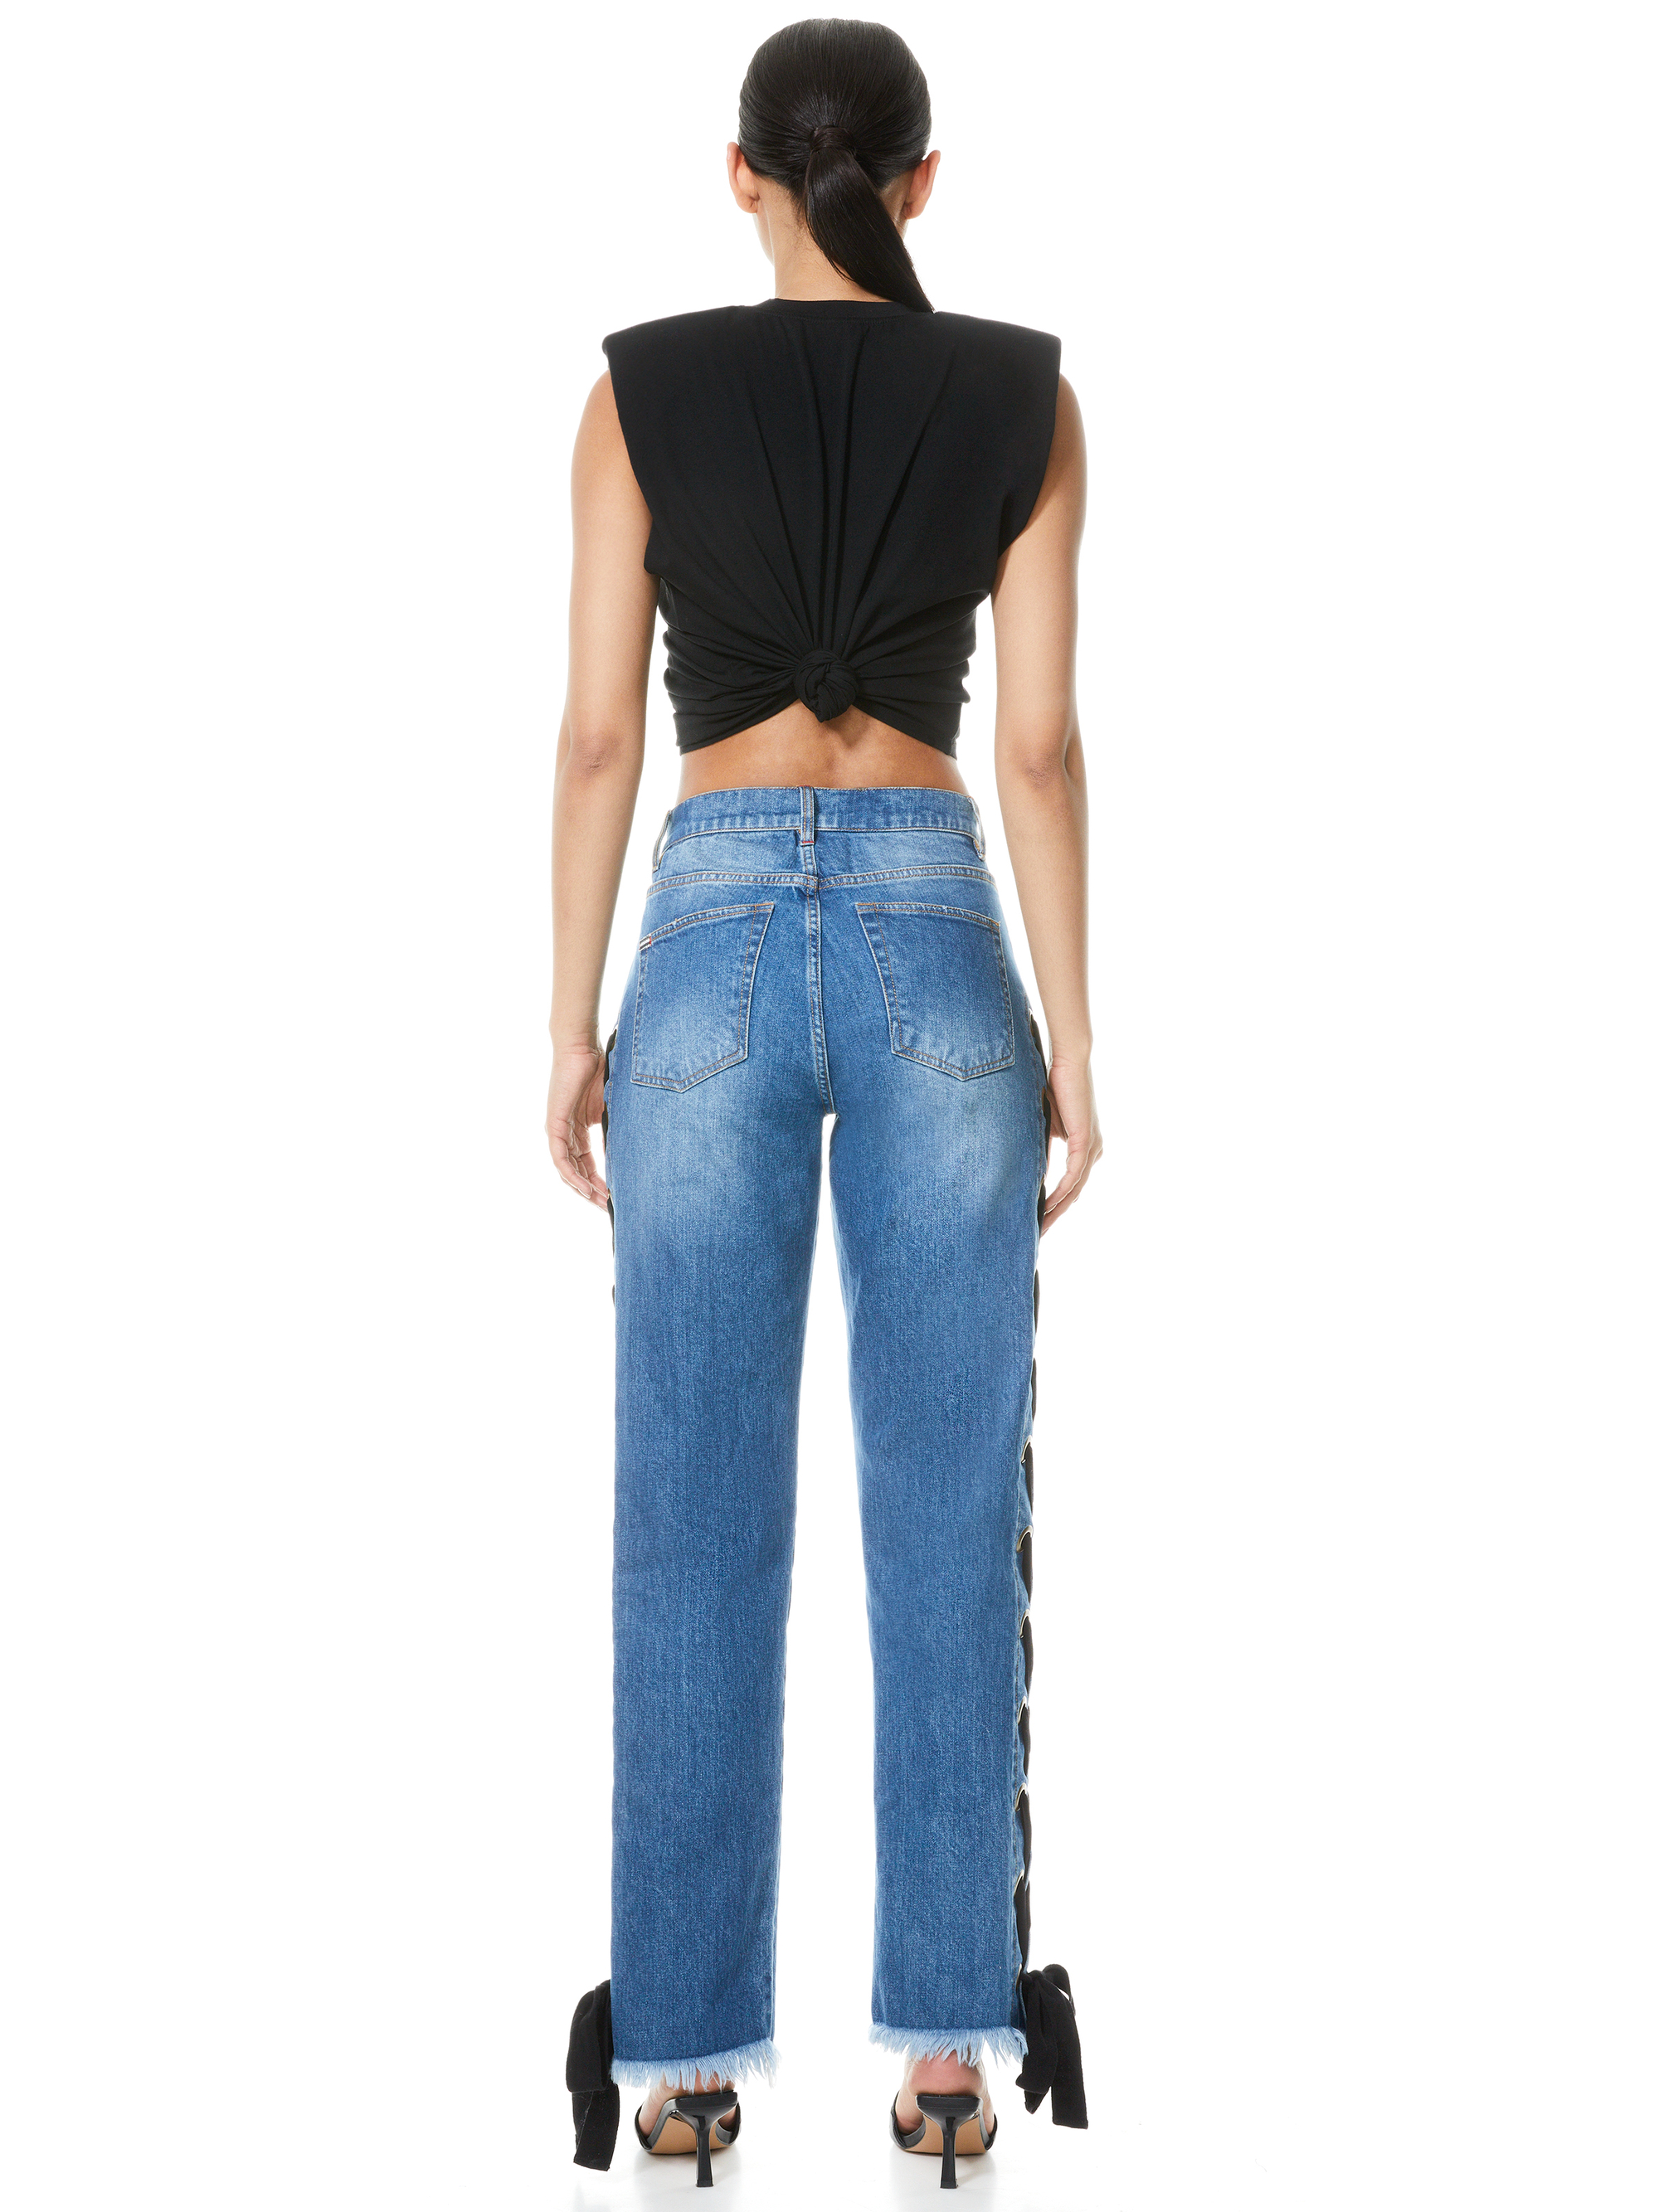 Shayne Lace Up Ribbon Jean In Best Intentions/blk | Alice And Olivia